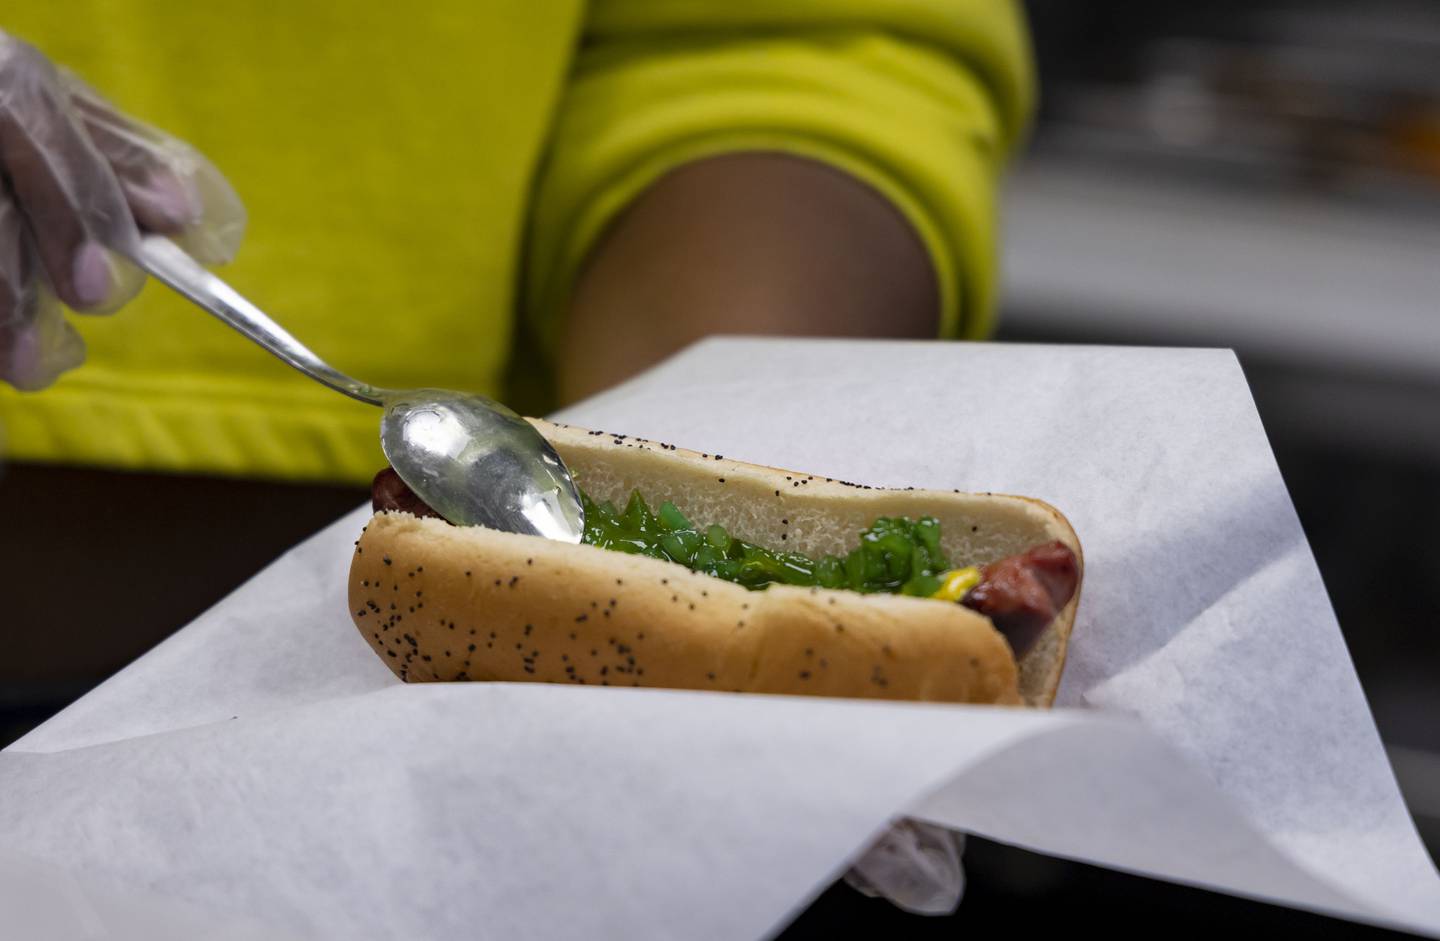 The Wiener's Circle char dog is prepared with green relish and other ingredients.